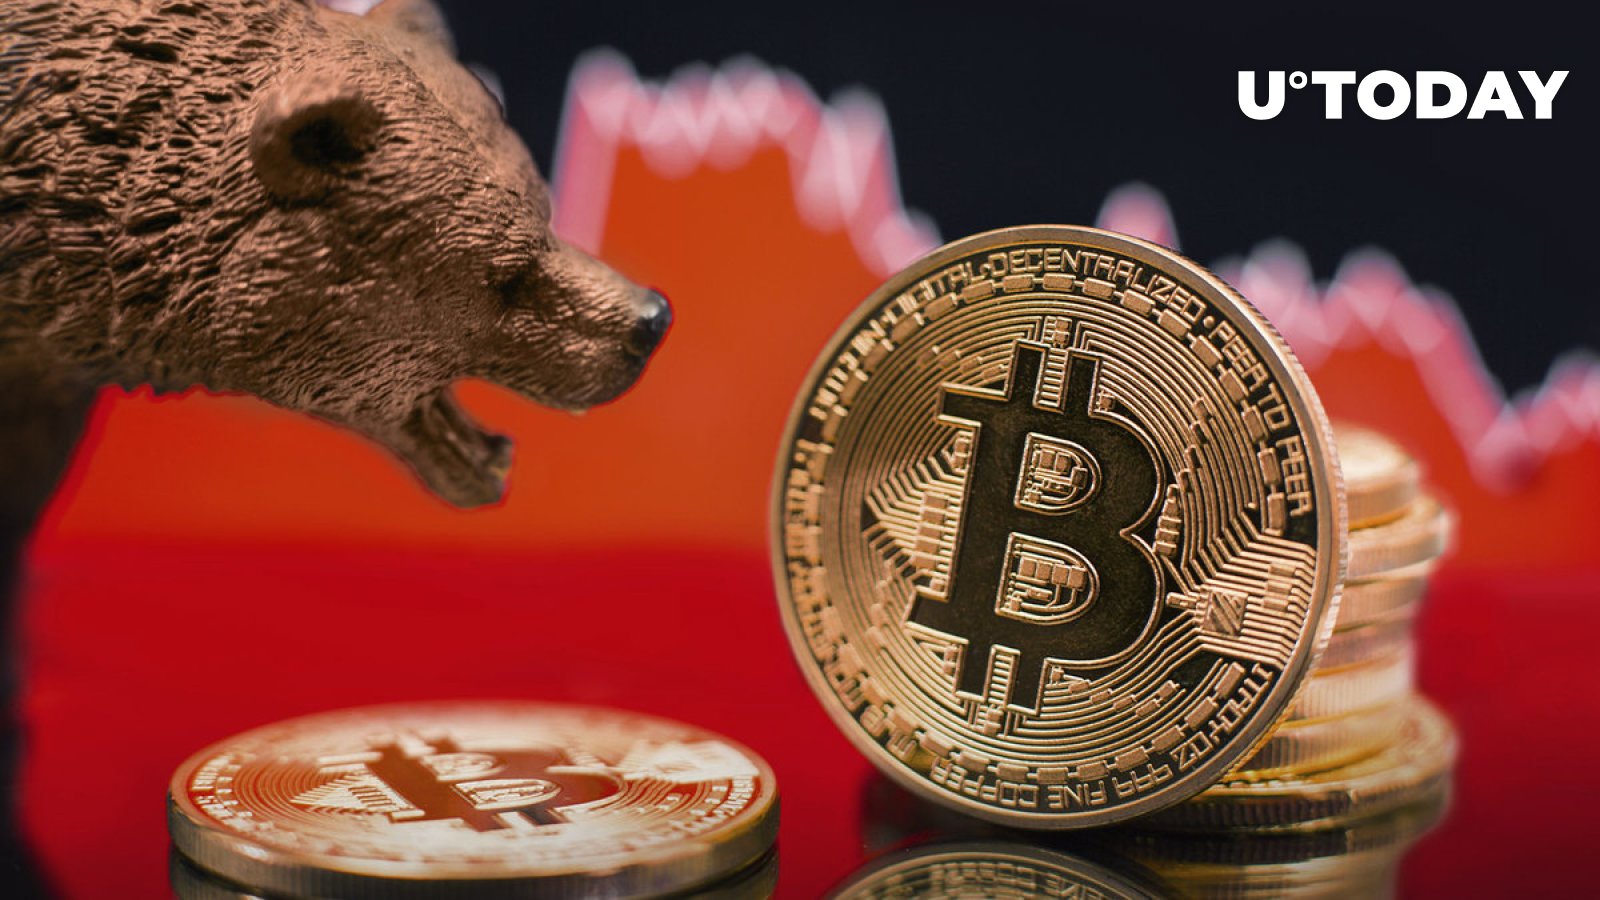 bitcoin-btc-to-give-bears-nice-welcome-shakeout-as-soon-as-this-happens-prominent-analyst